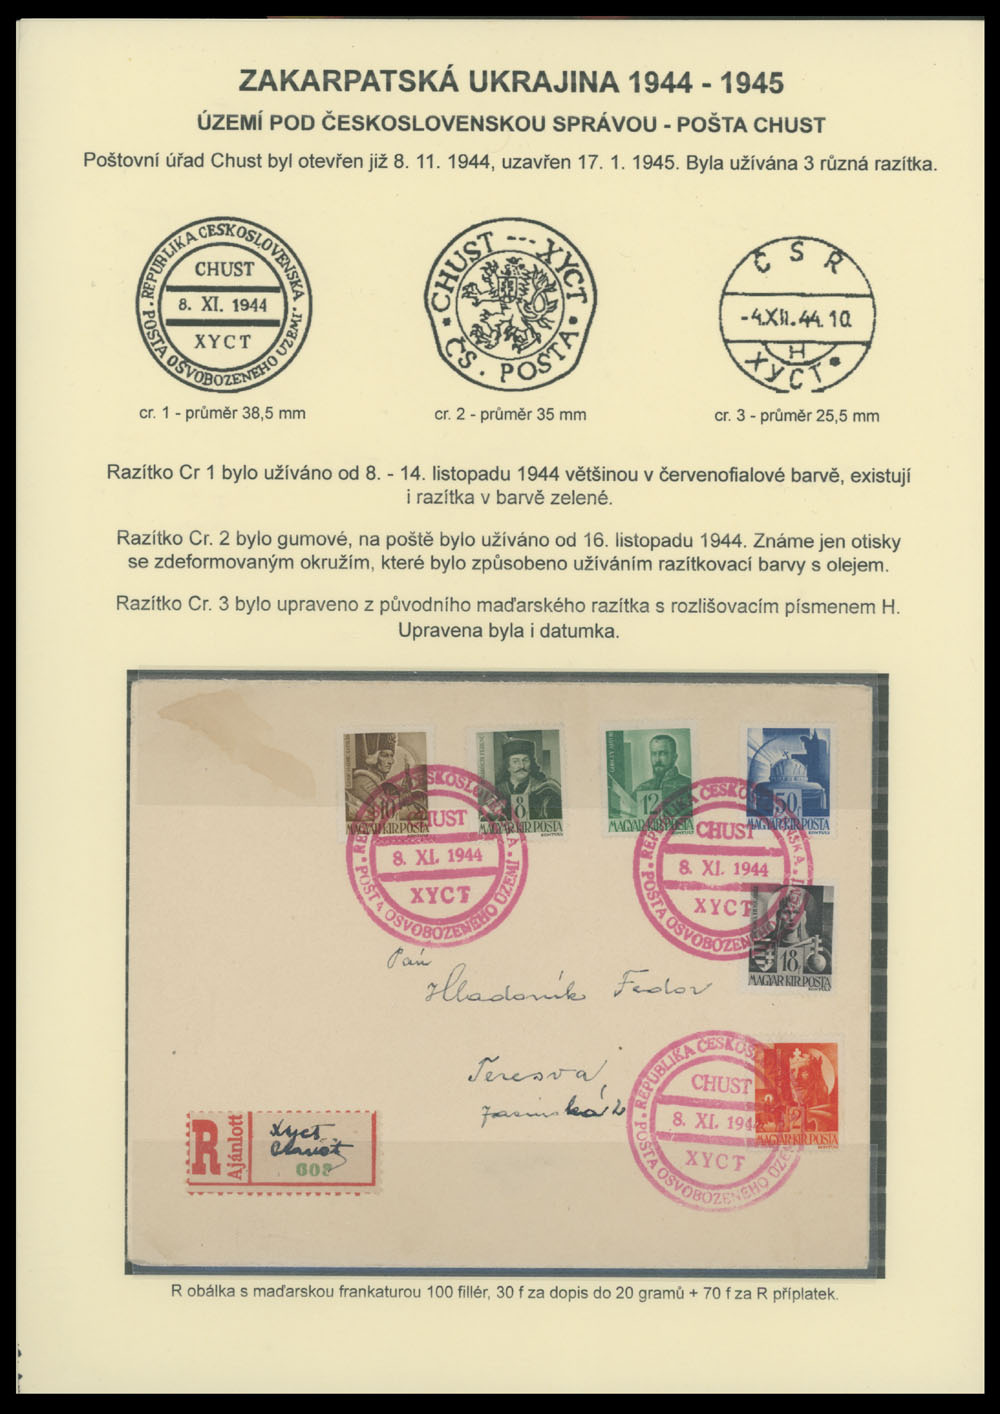 Lot 1 - 1. Hungarian Postage stamps used in Chust  -  Raritan Stamps Inc. The Jiří Majer Collection of Carpatho - Ukraine 1944-1945, Live Bidding Auction #98